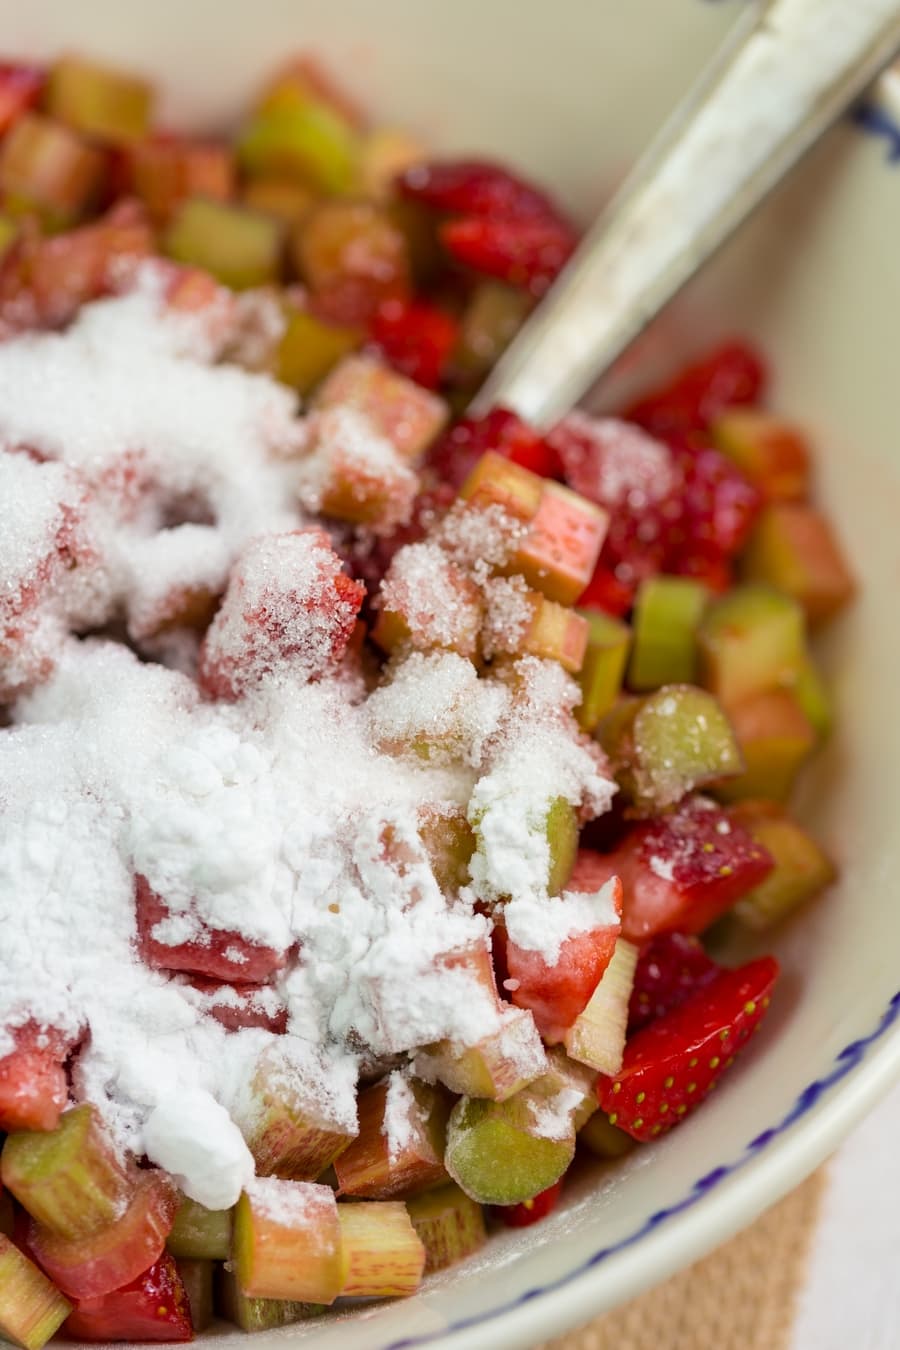 Strawberry rhubarb crisp base: sugar and starch added to diced fruits.